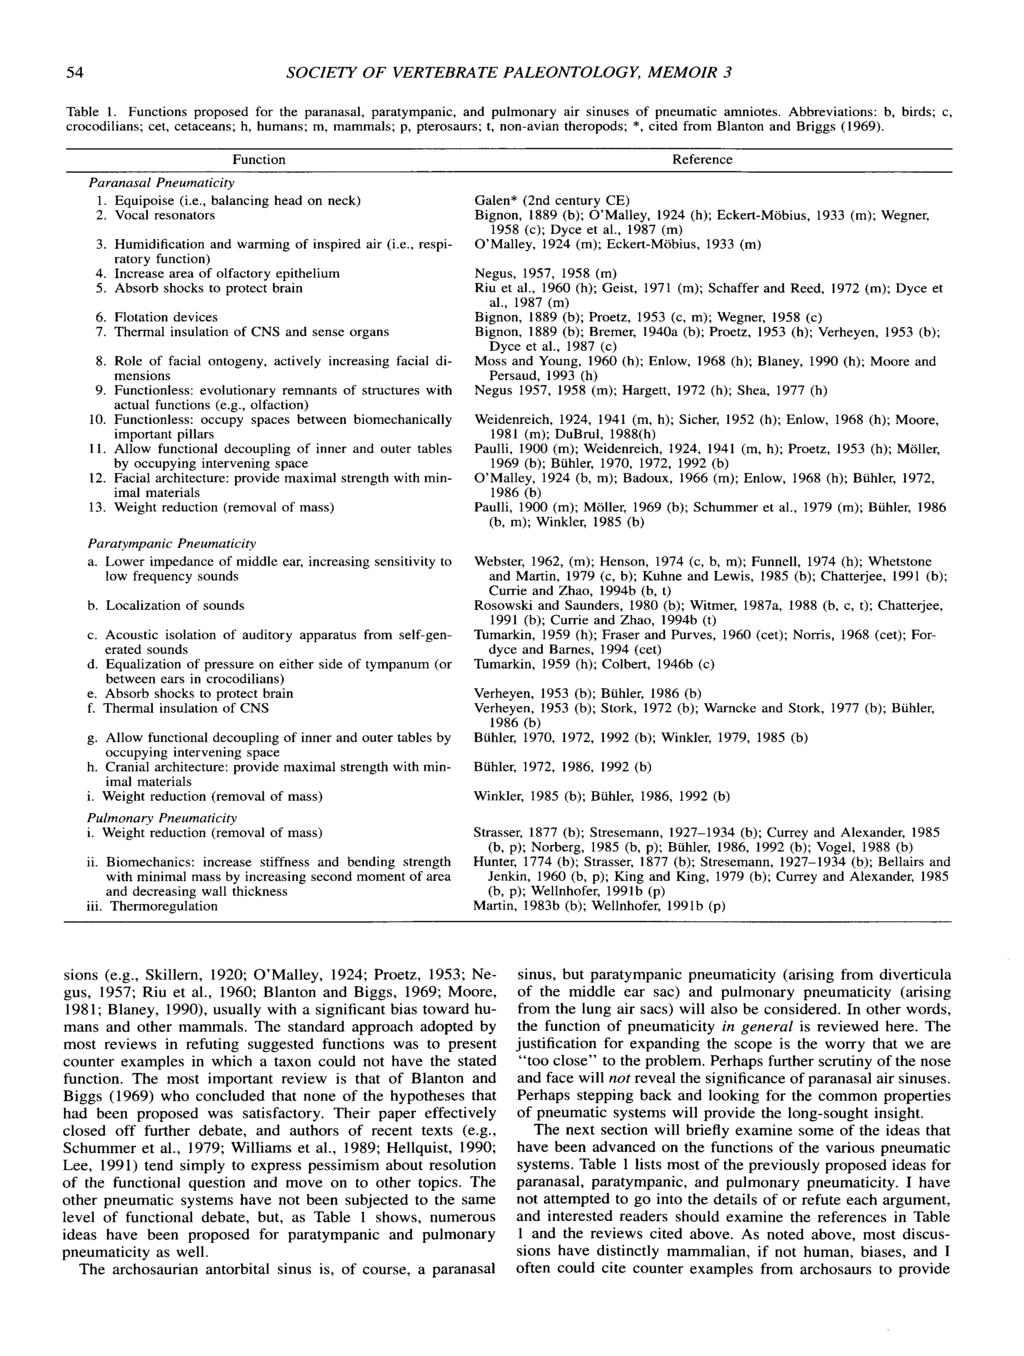 54 SOCIETY OF VERTEBRATE PALEONTOLOGY, MEMOIR 3 Table I. Functions proposed for the paranasal, paratympanic, and pulmonary air sinuses of pneumatic amniotes.